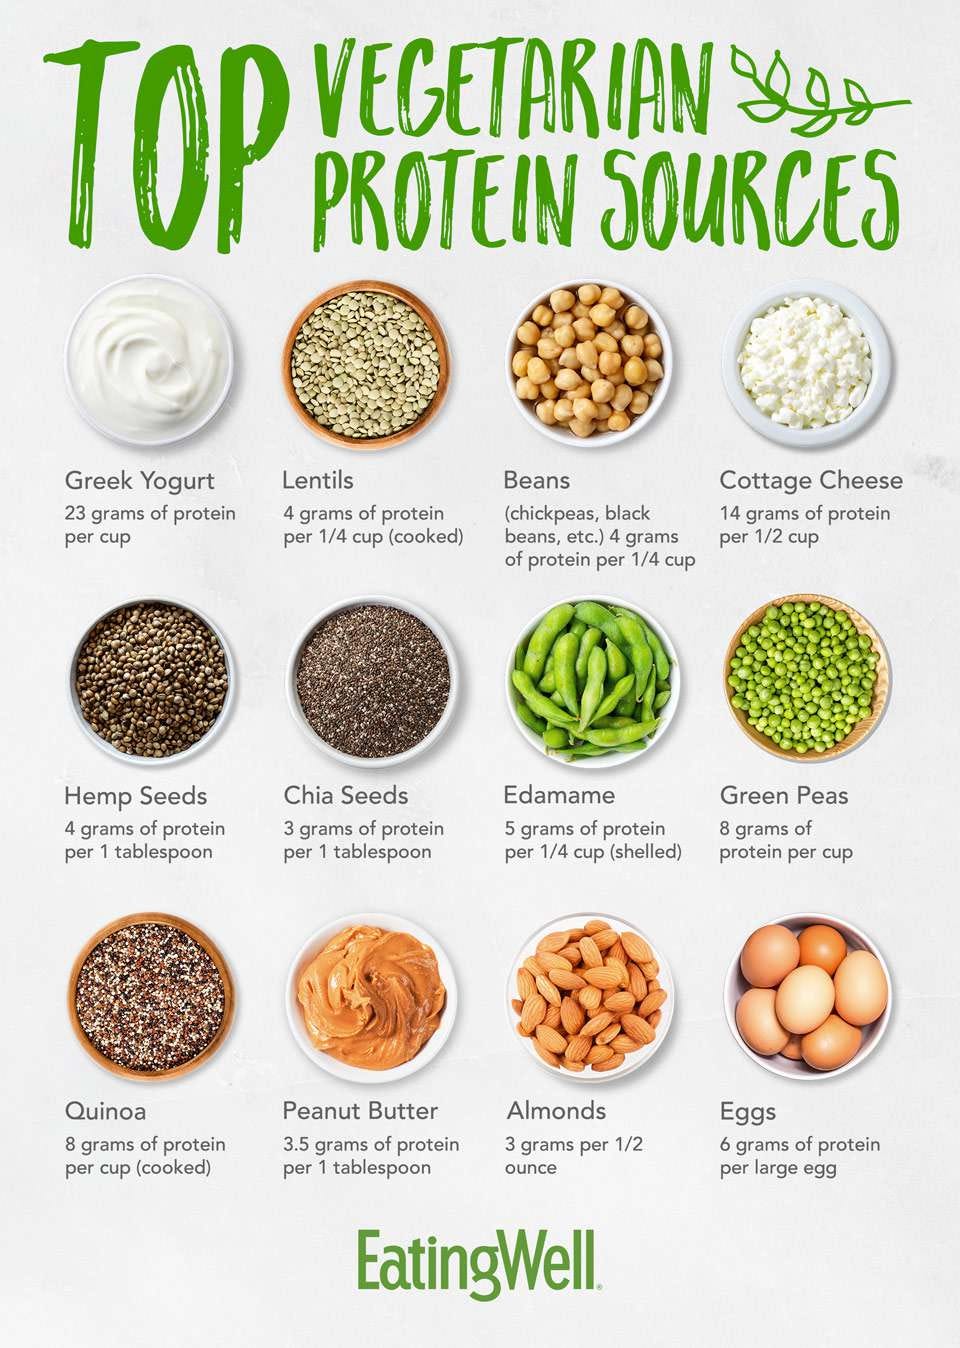 Top Vegetarian Protein Sources